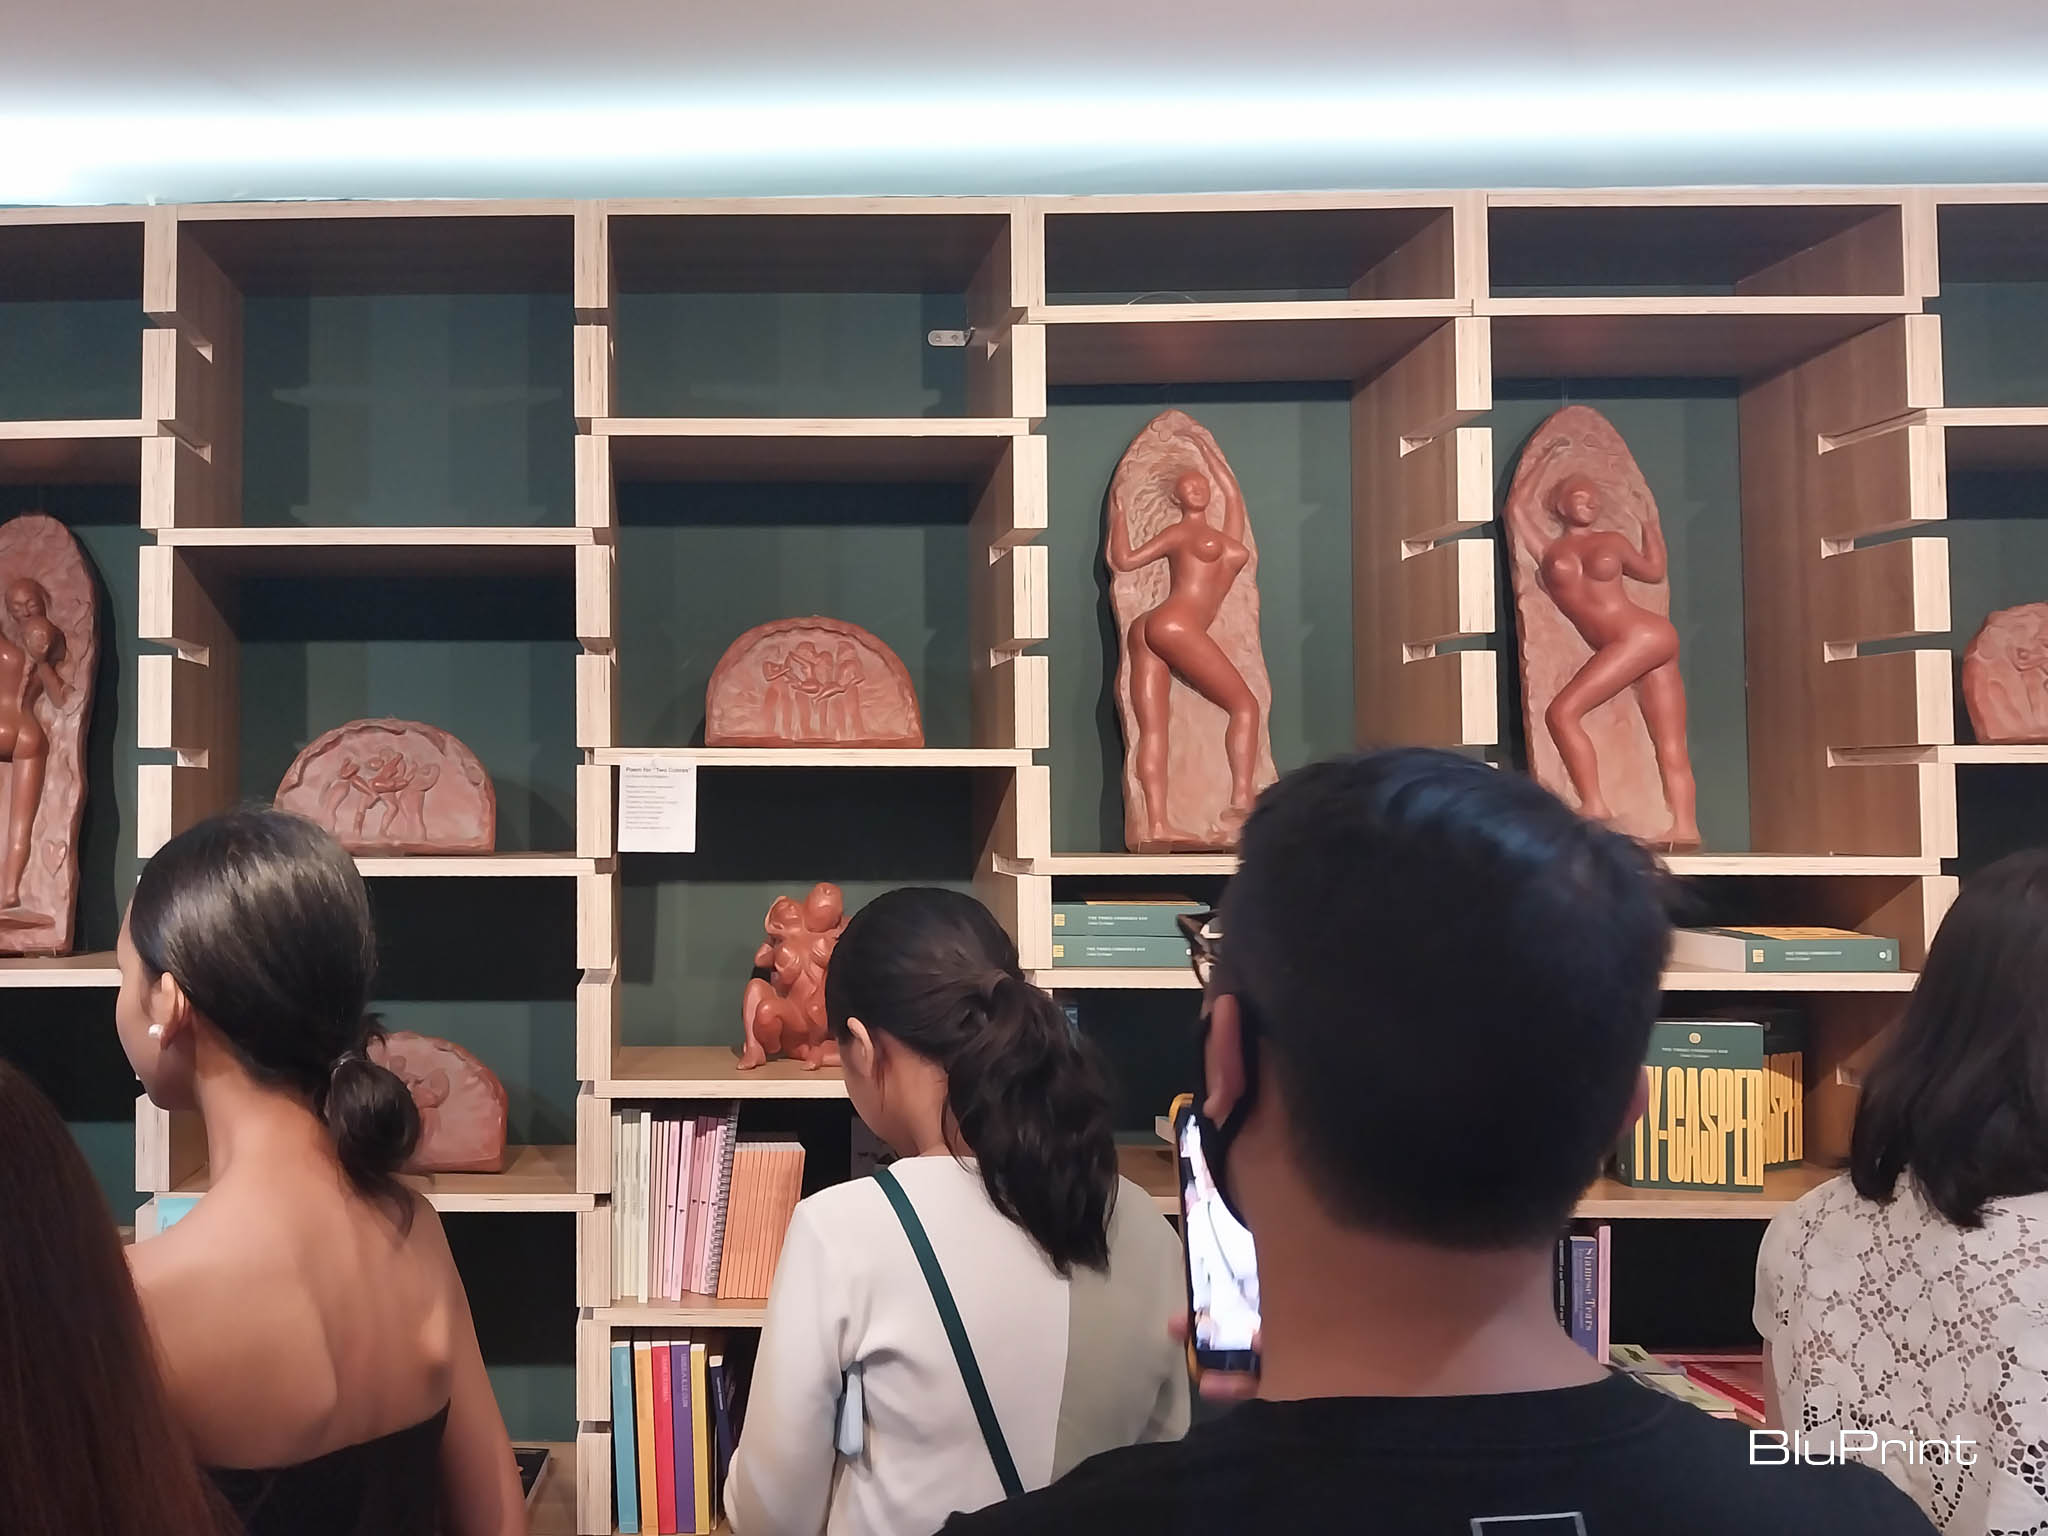 Sculptures as posed in the bookshelves. Photo by Elle F. Yap